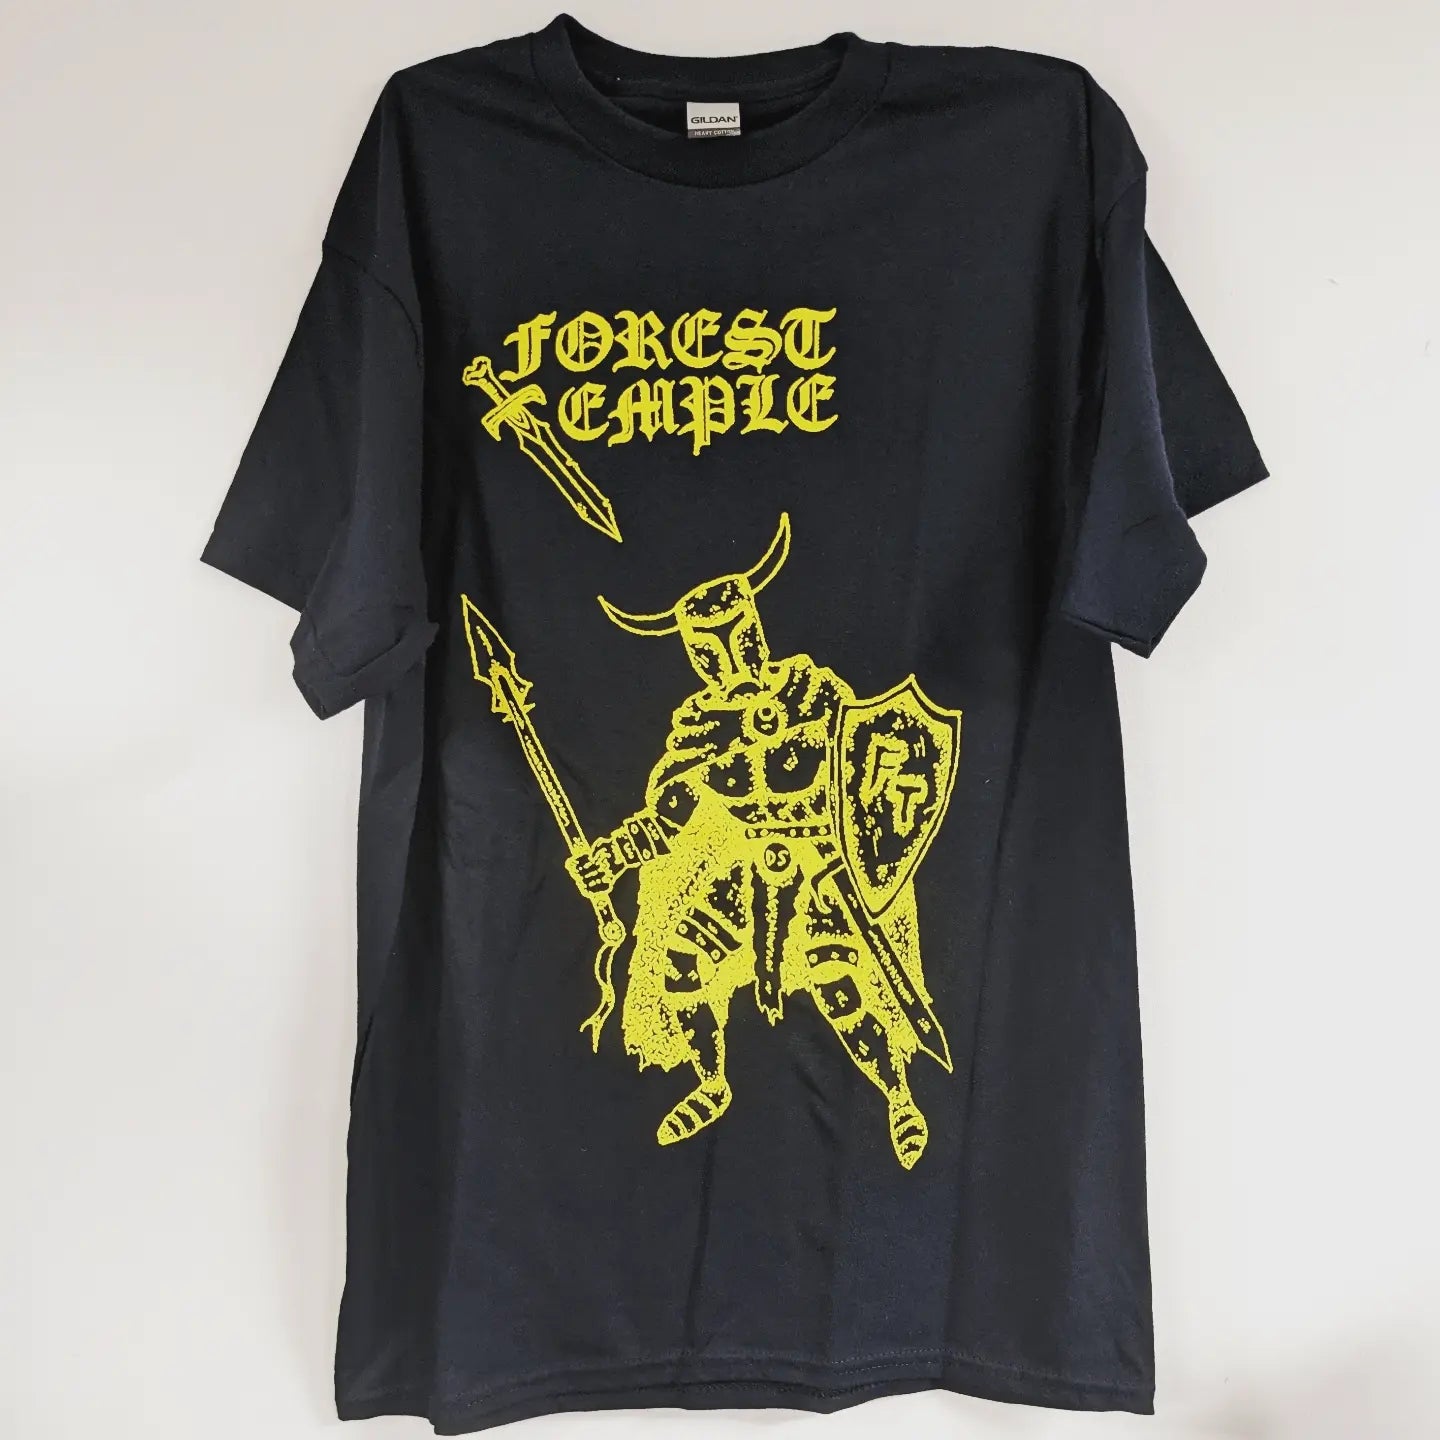 [SOLD OUT] FOREST TEMPLE "Fantasy and Fable" T-Shirt [BLACK]